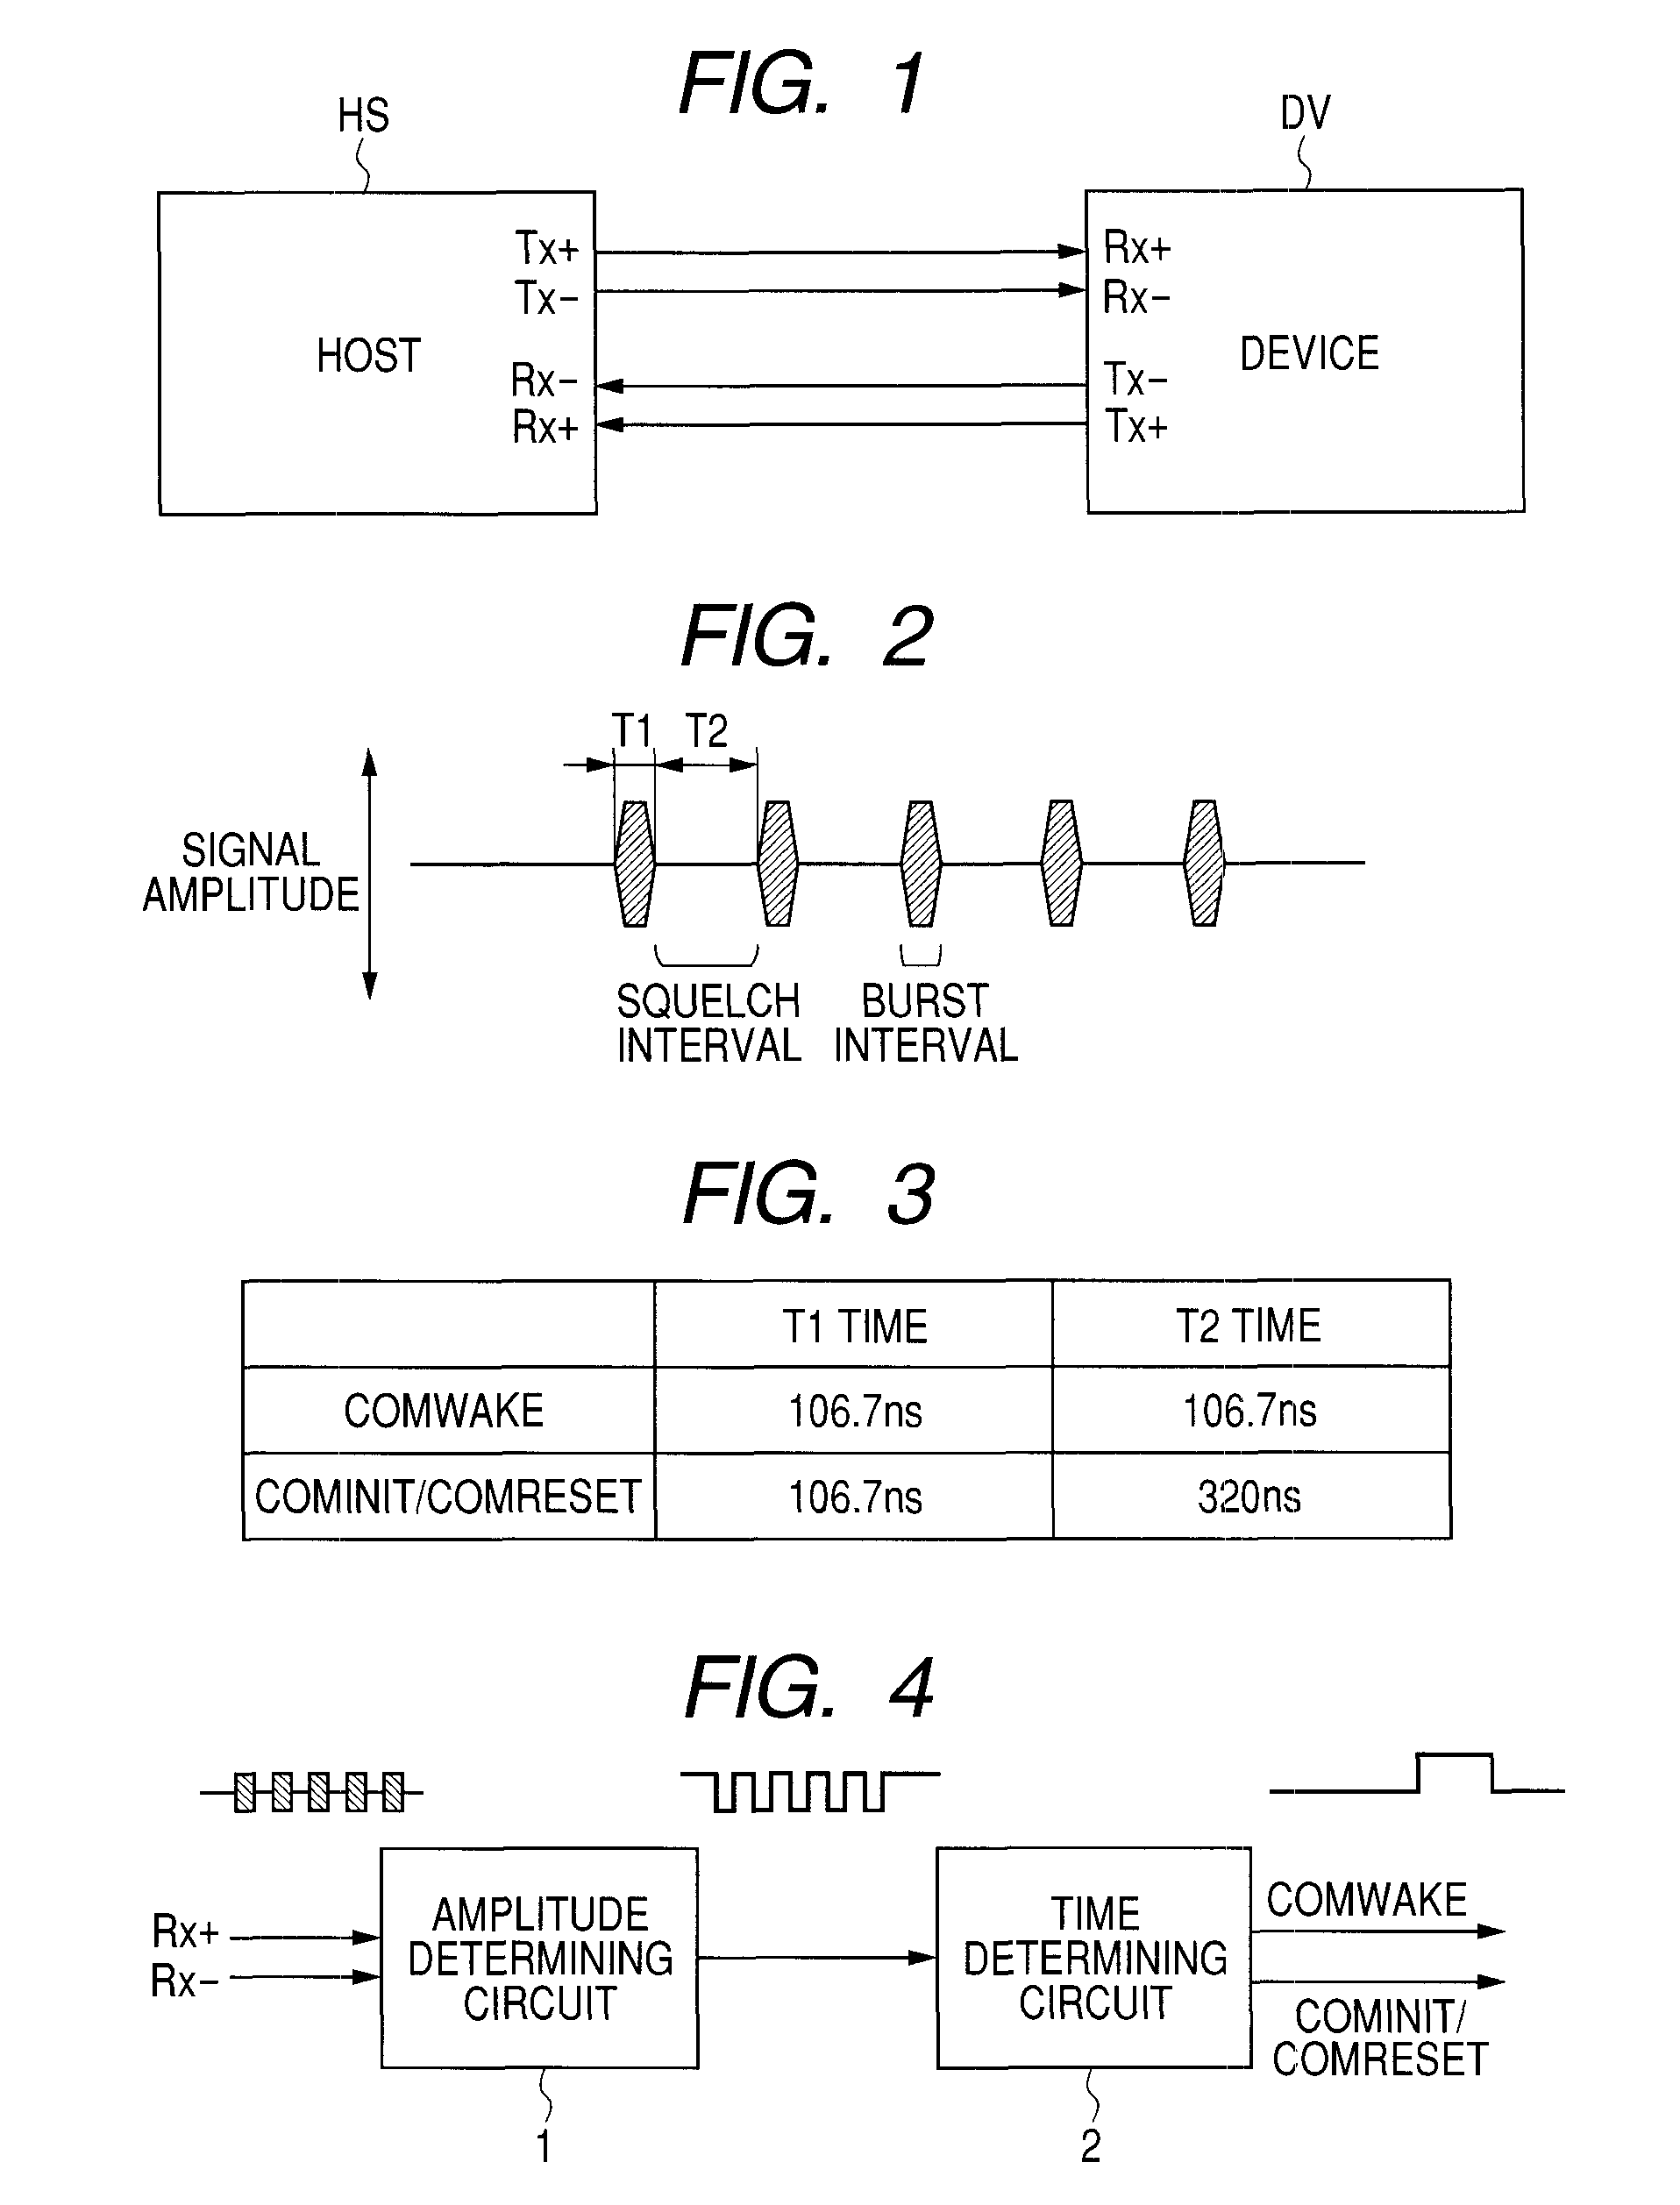 OOB (out of band) detection circuit and serial ATA system